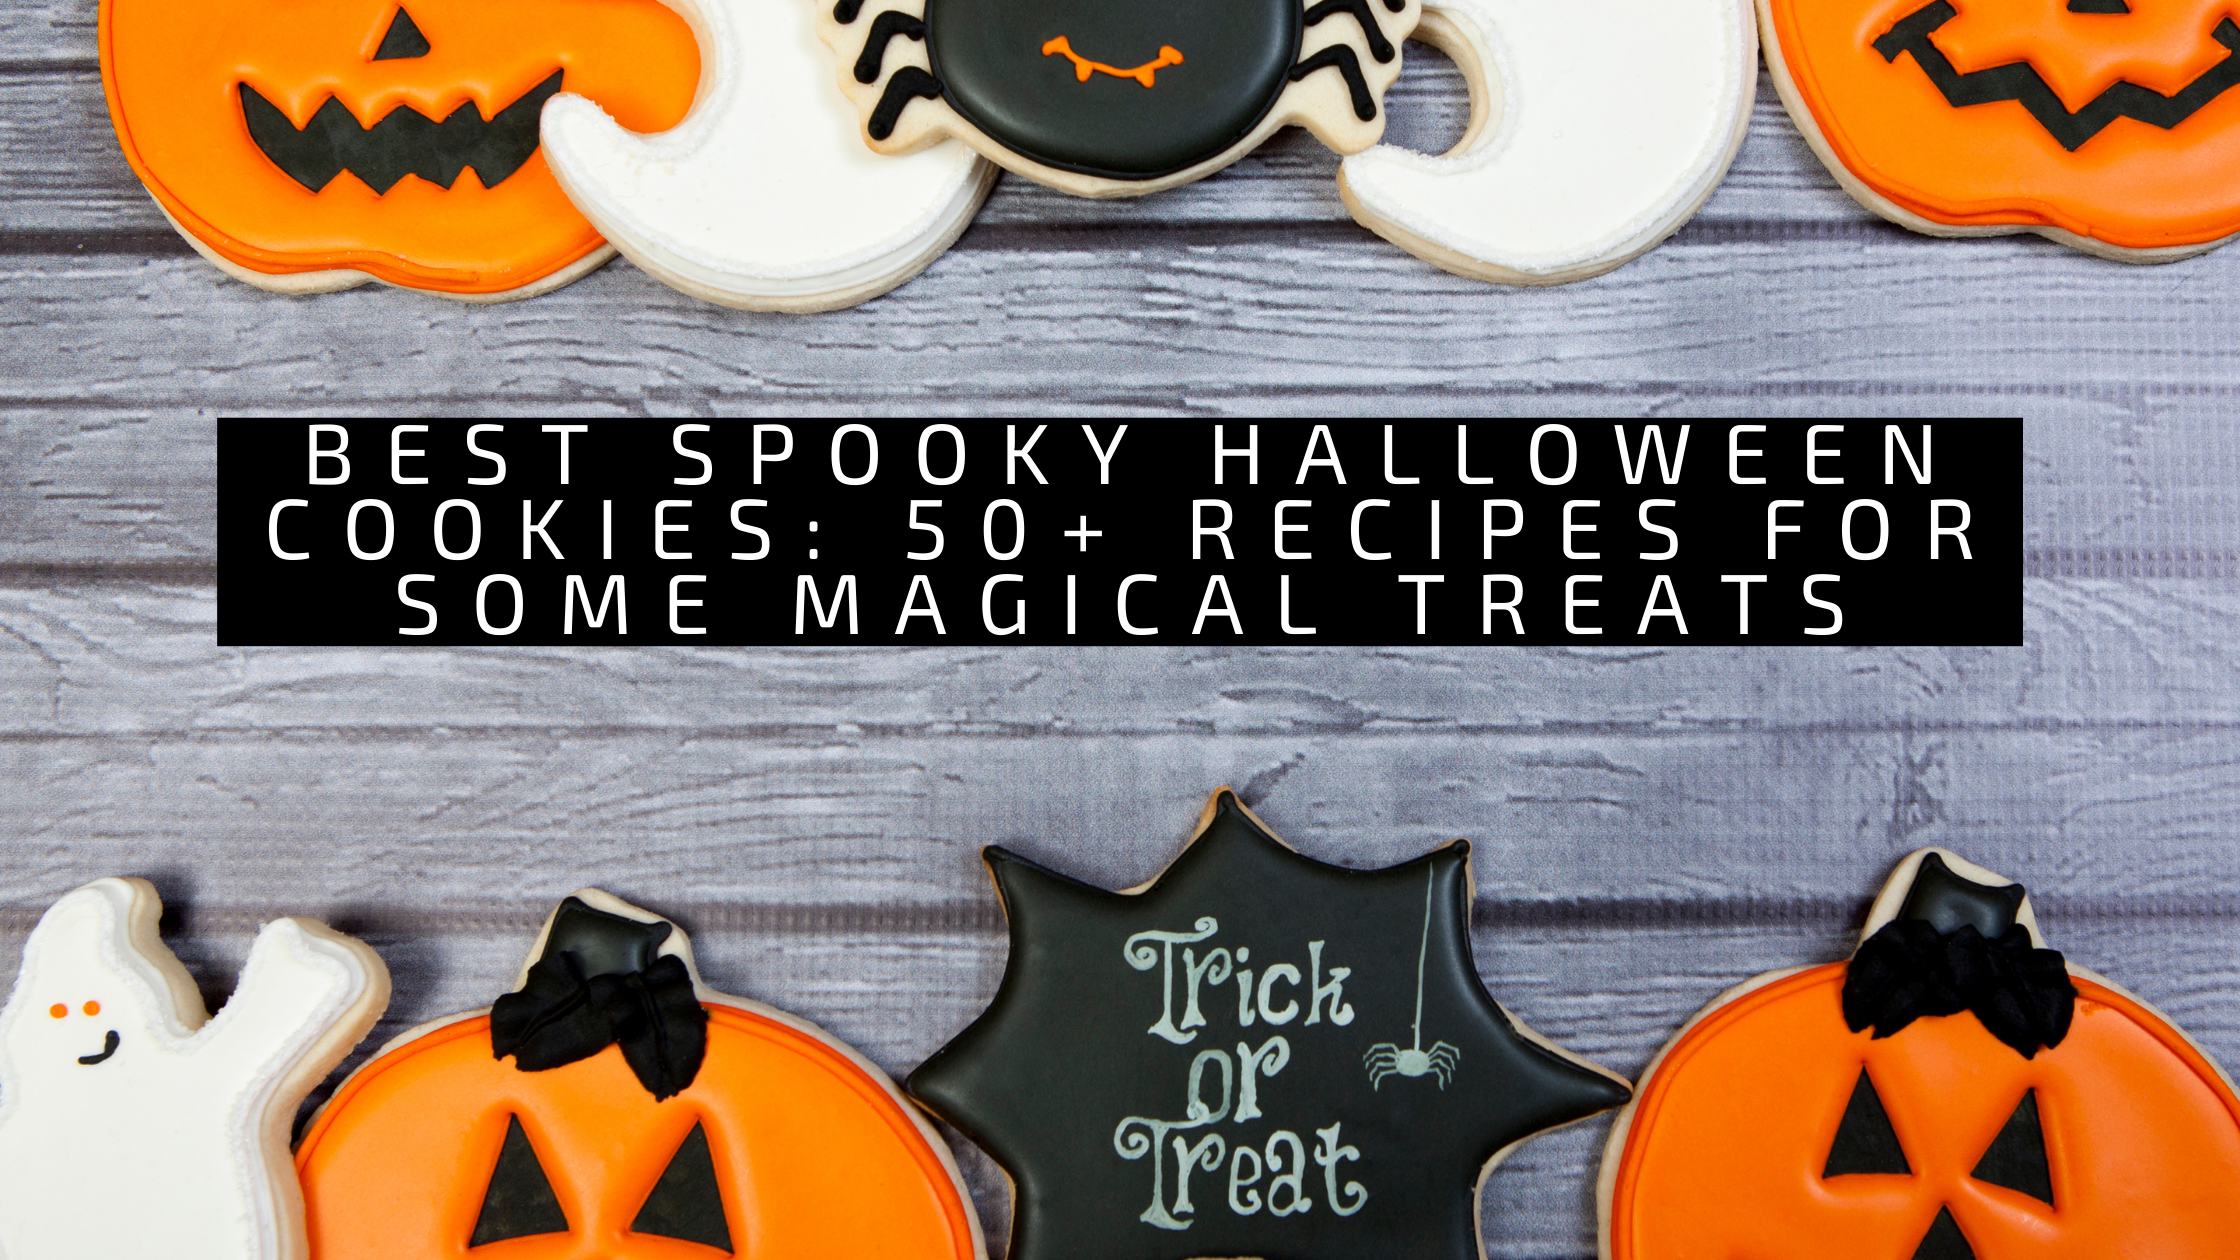 Best Spooky Halloween Cookies: 50+ Recipes for Some Magical Treats 16